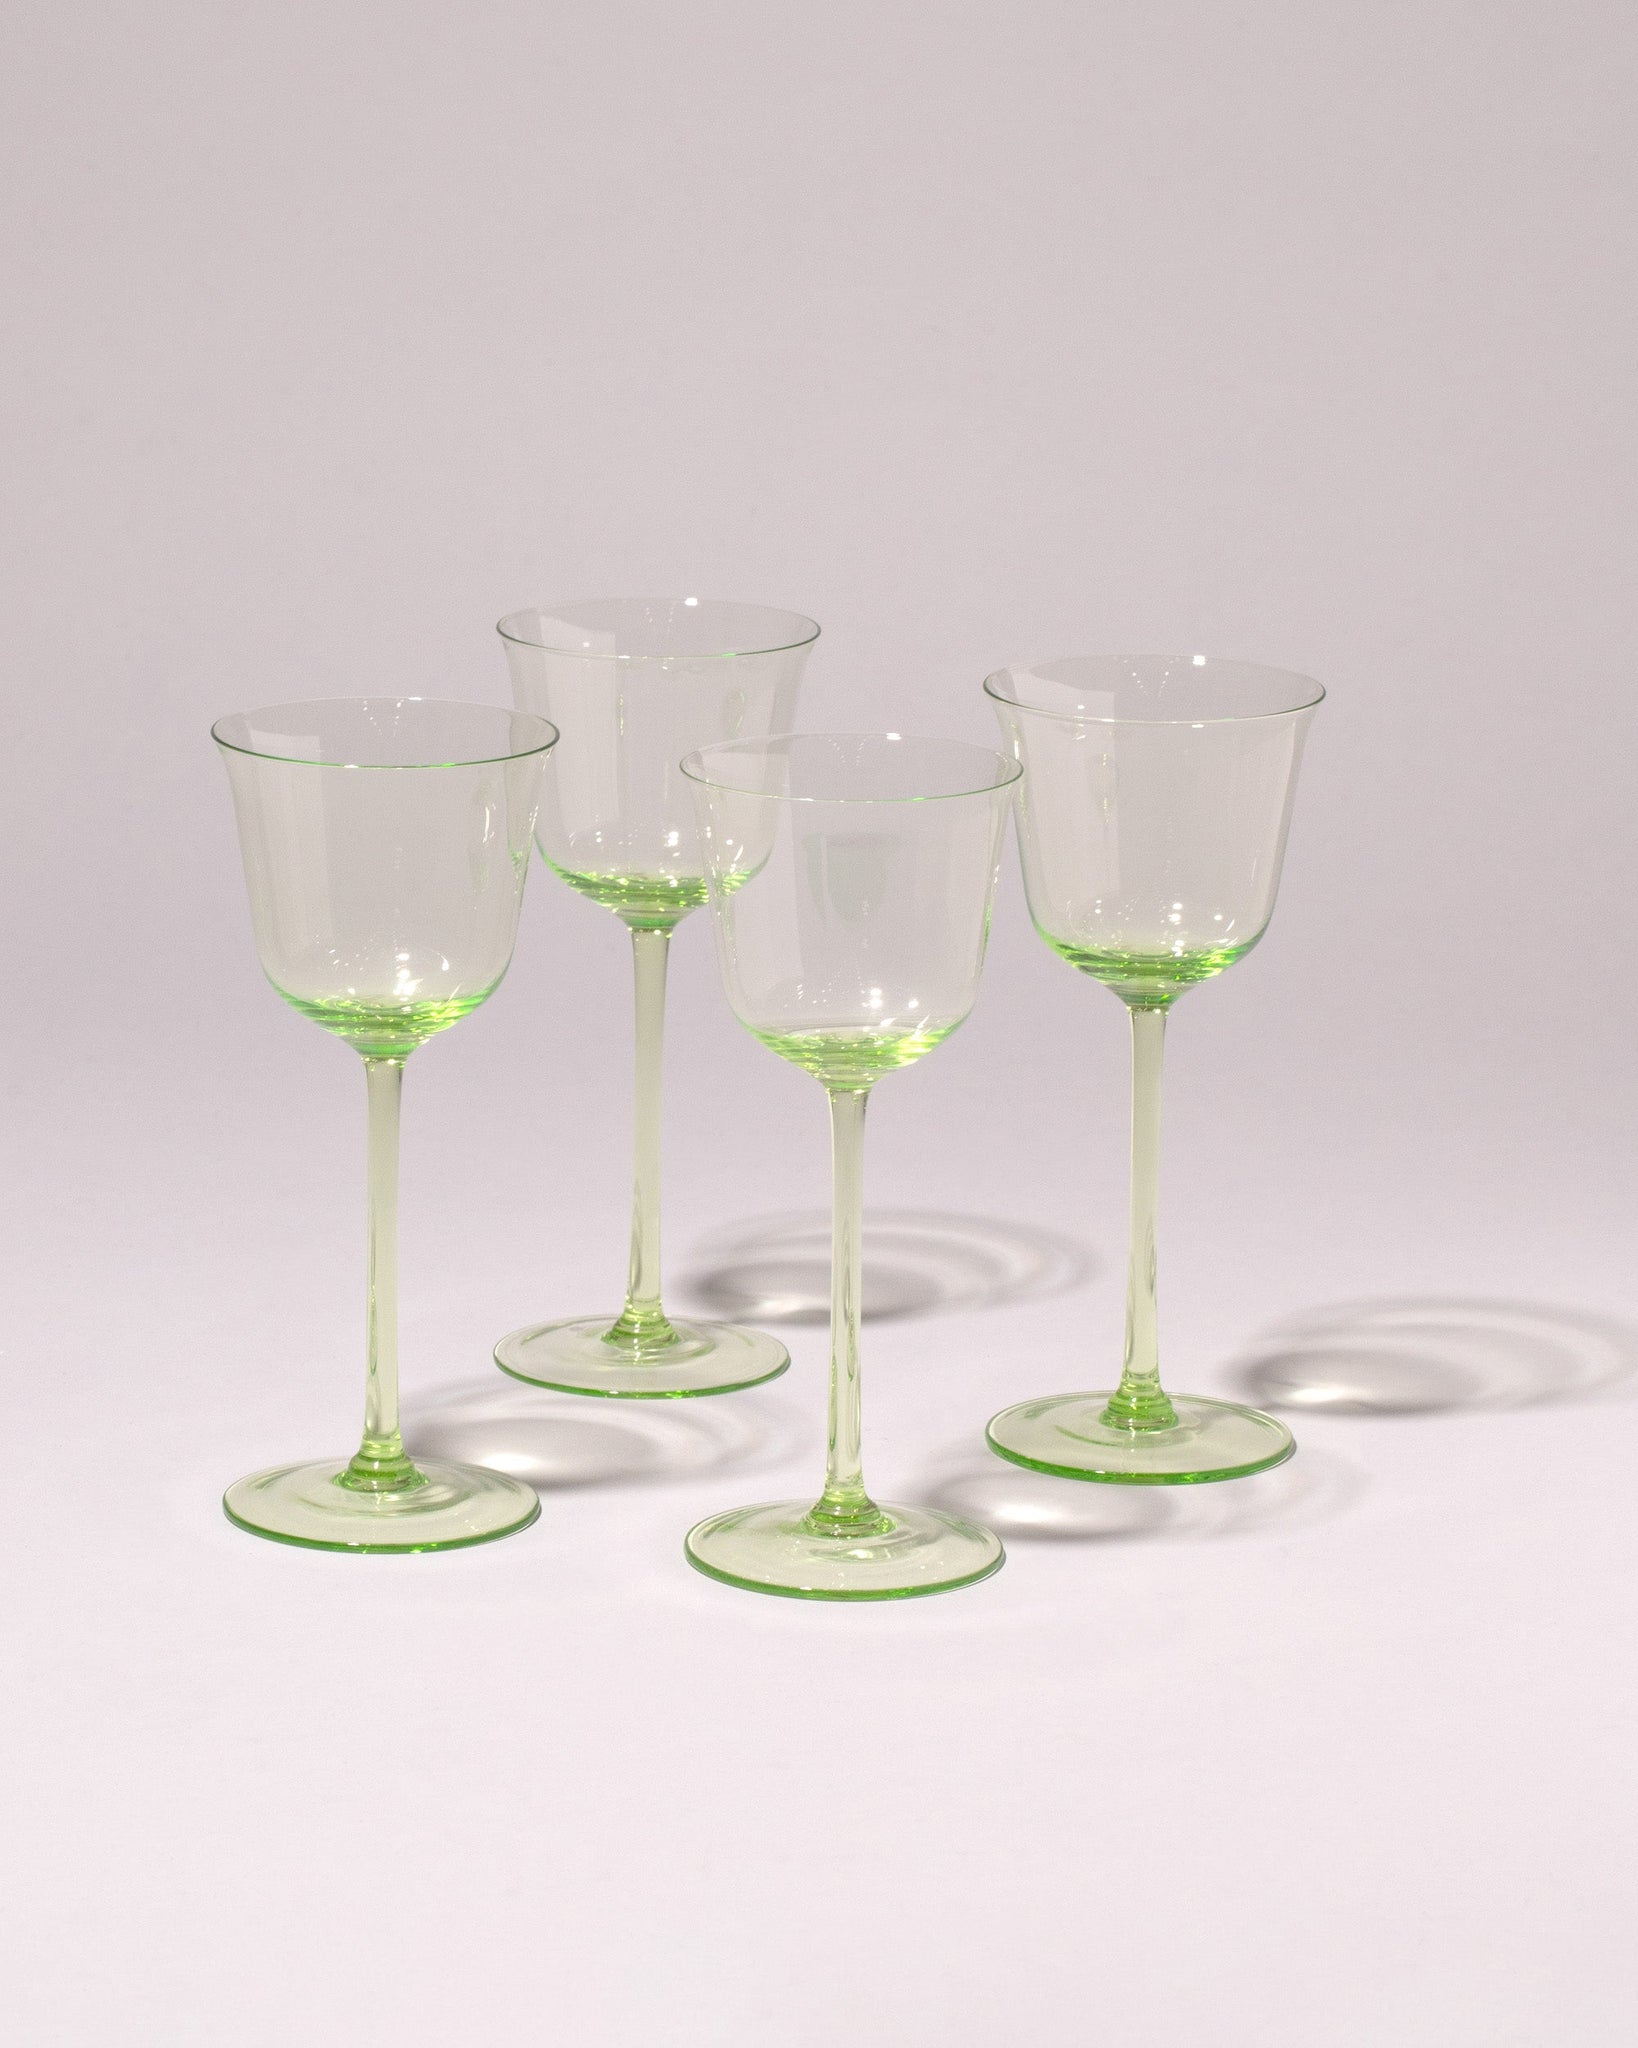 Group of Serax Grace Wine Glasses by Ann Demeulemeester on light color background.